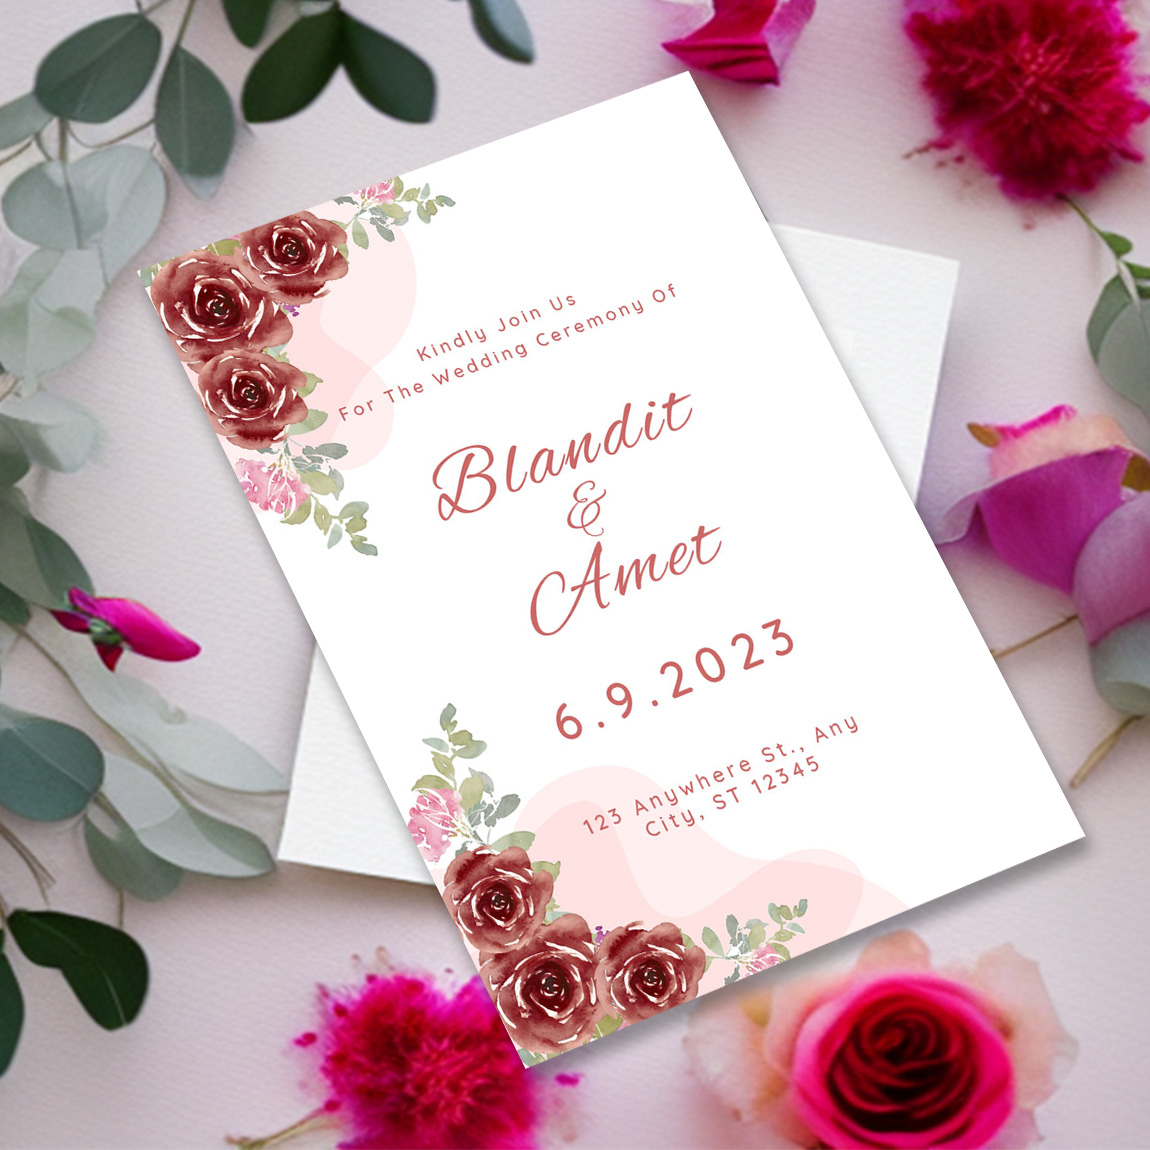 Image of beautiful wedding invitation with floral design.